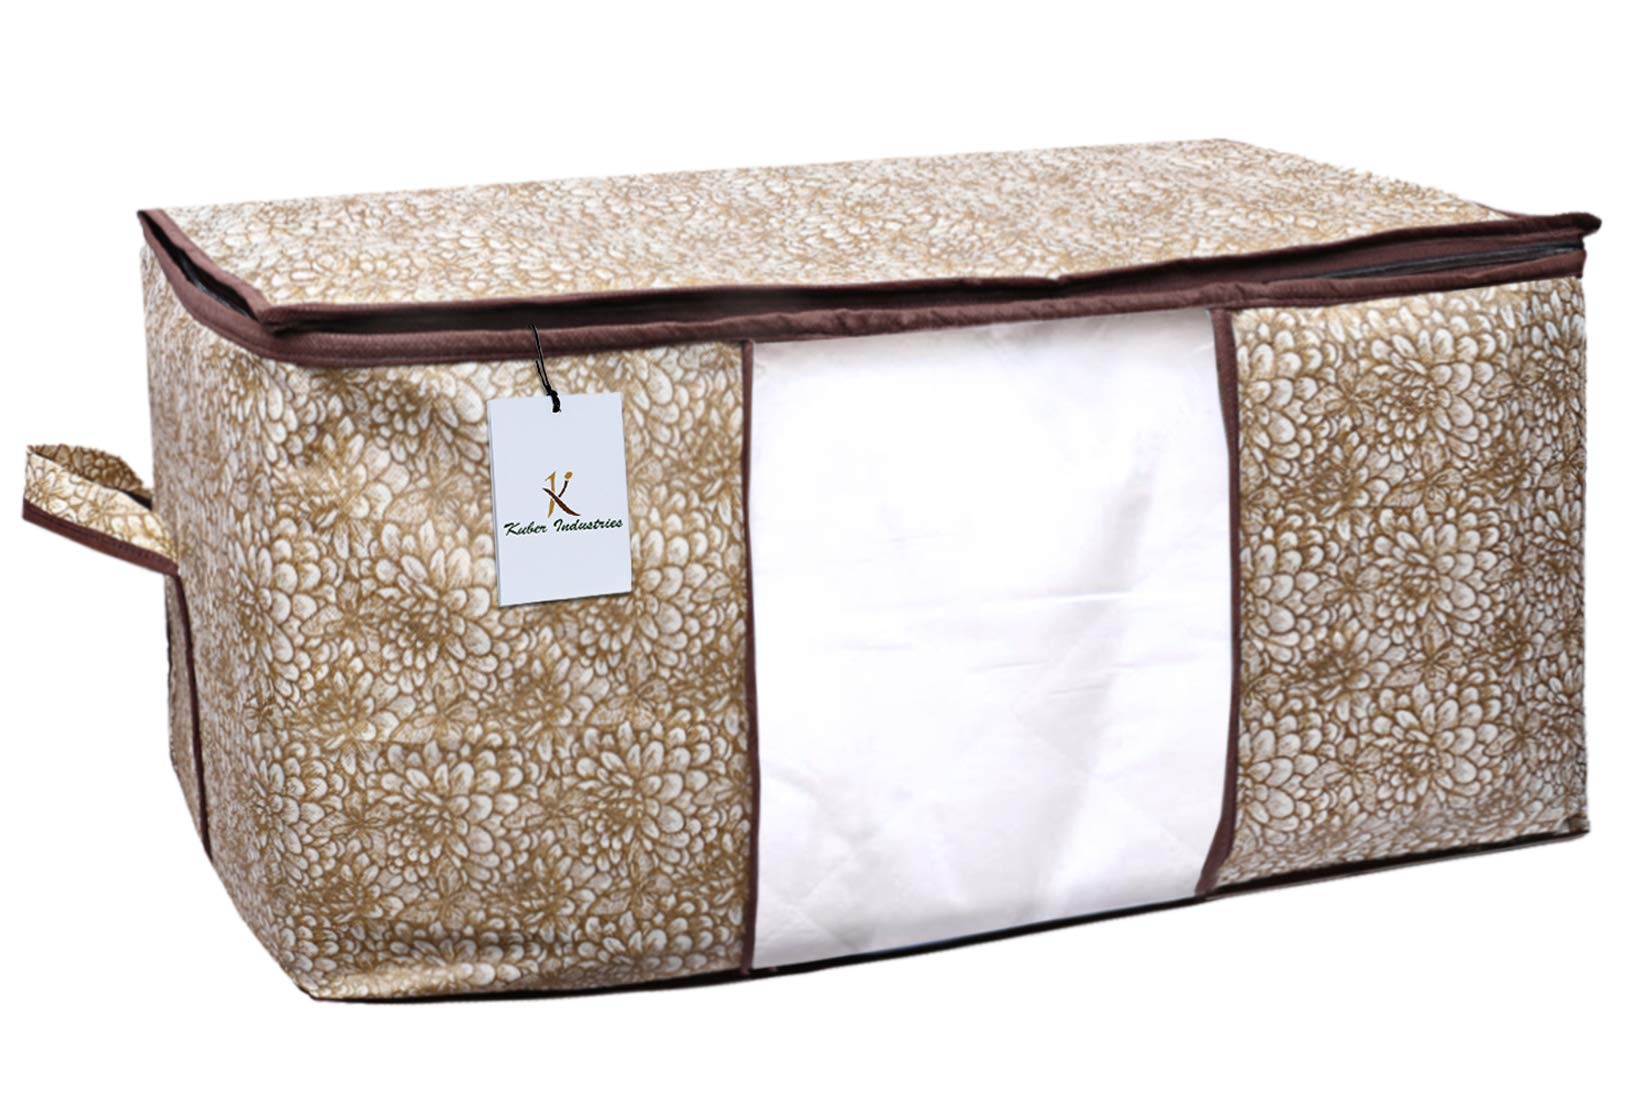 Kuber Industries Flower Design Non Woven Underbed Storage Bag|Large Storage Organiser|Blanket Cover with Transparent Window|Size 65 x 47 x 34 CM|Pack of 4 (Brown)